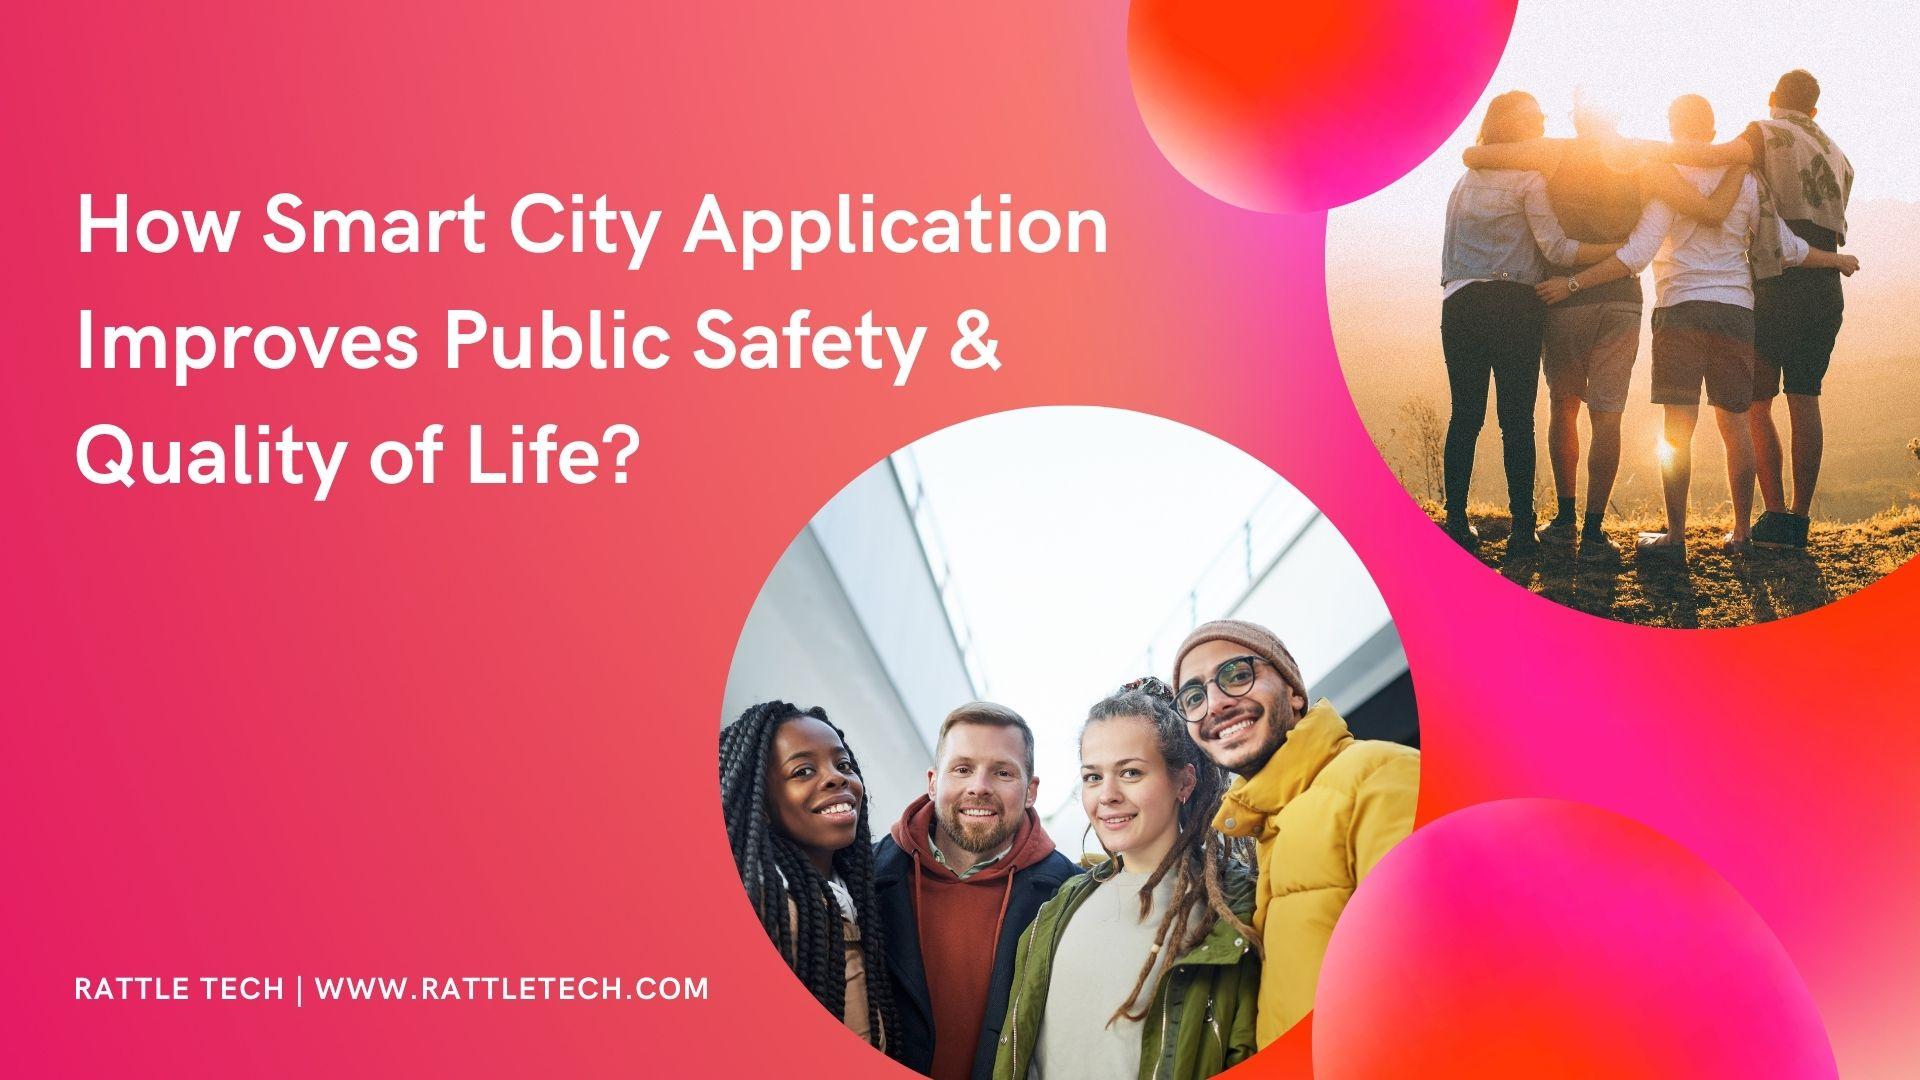 How Smart City Application Improves Public Safety & Quality of Life